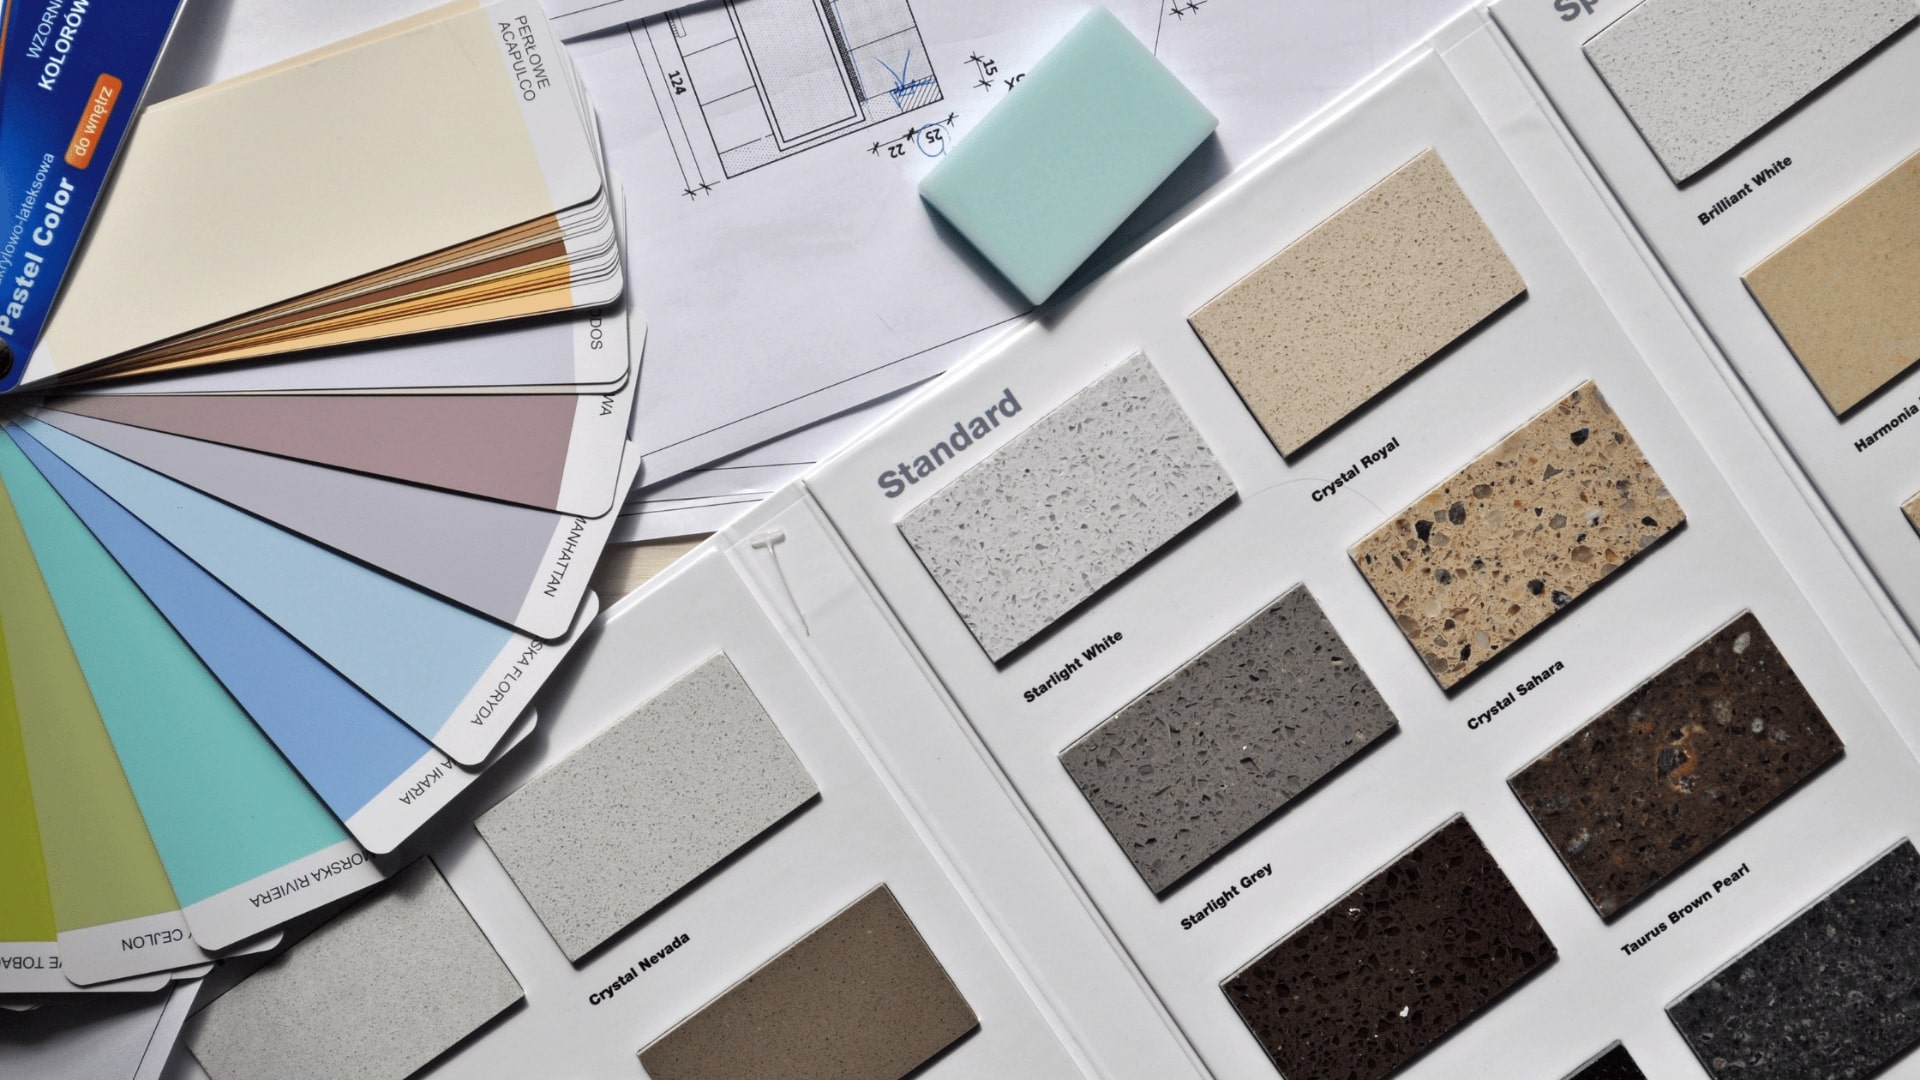 samples of product materials such as paint colours, granite choices, and more used to show options in interior design